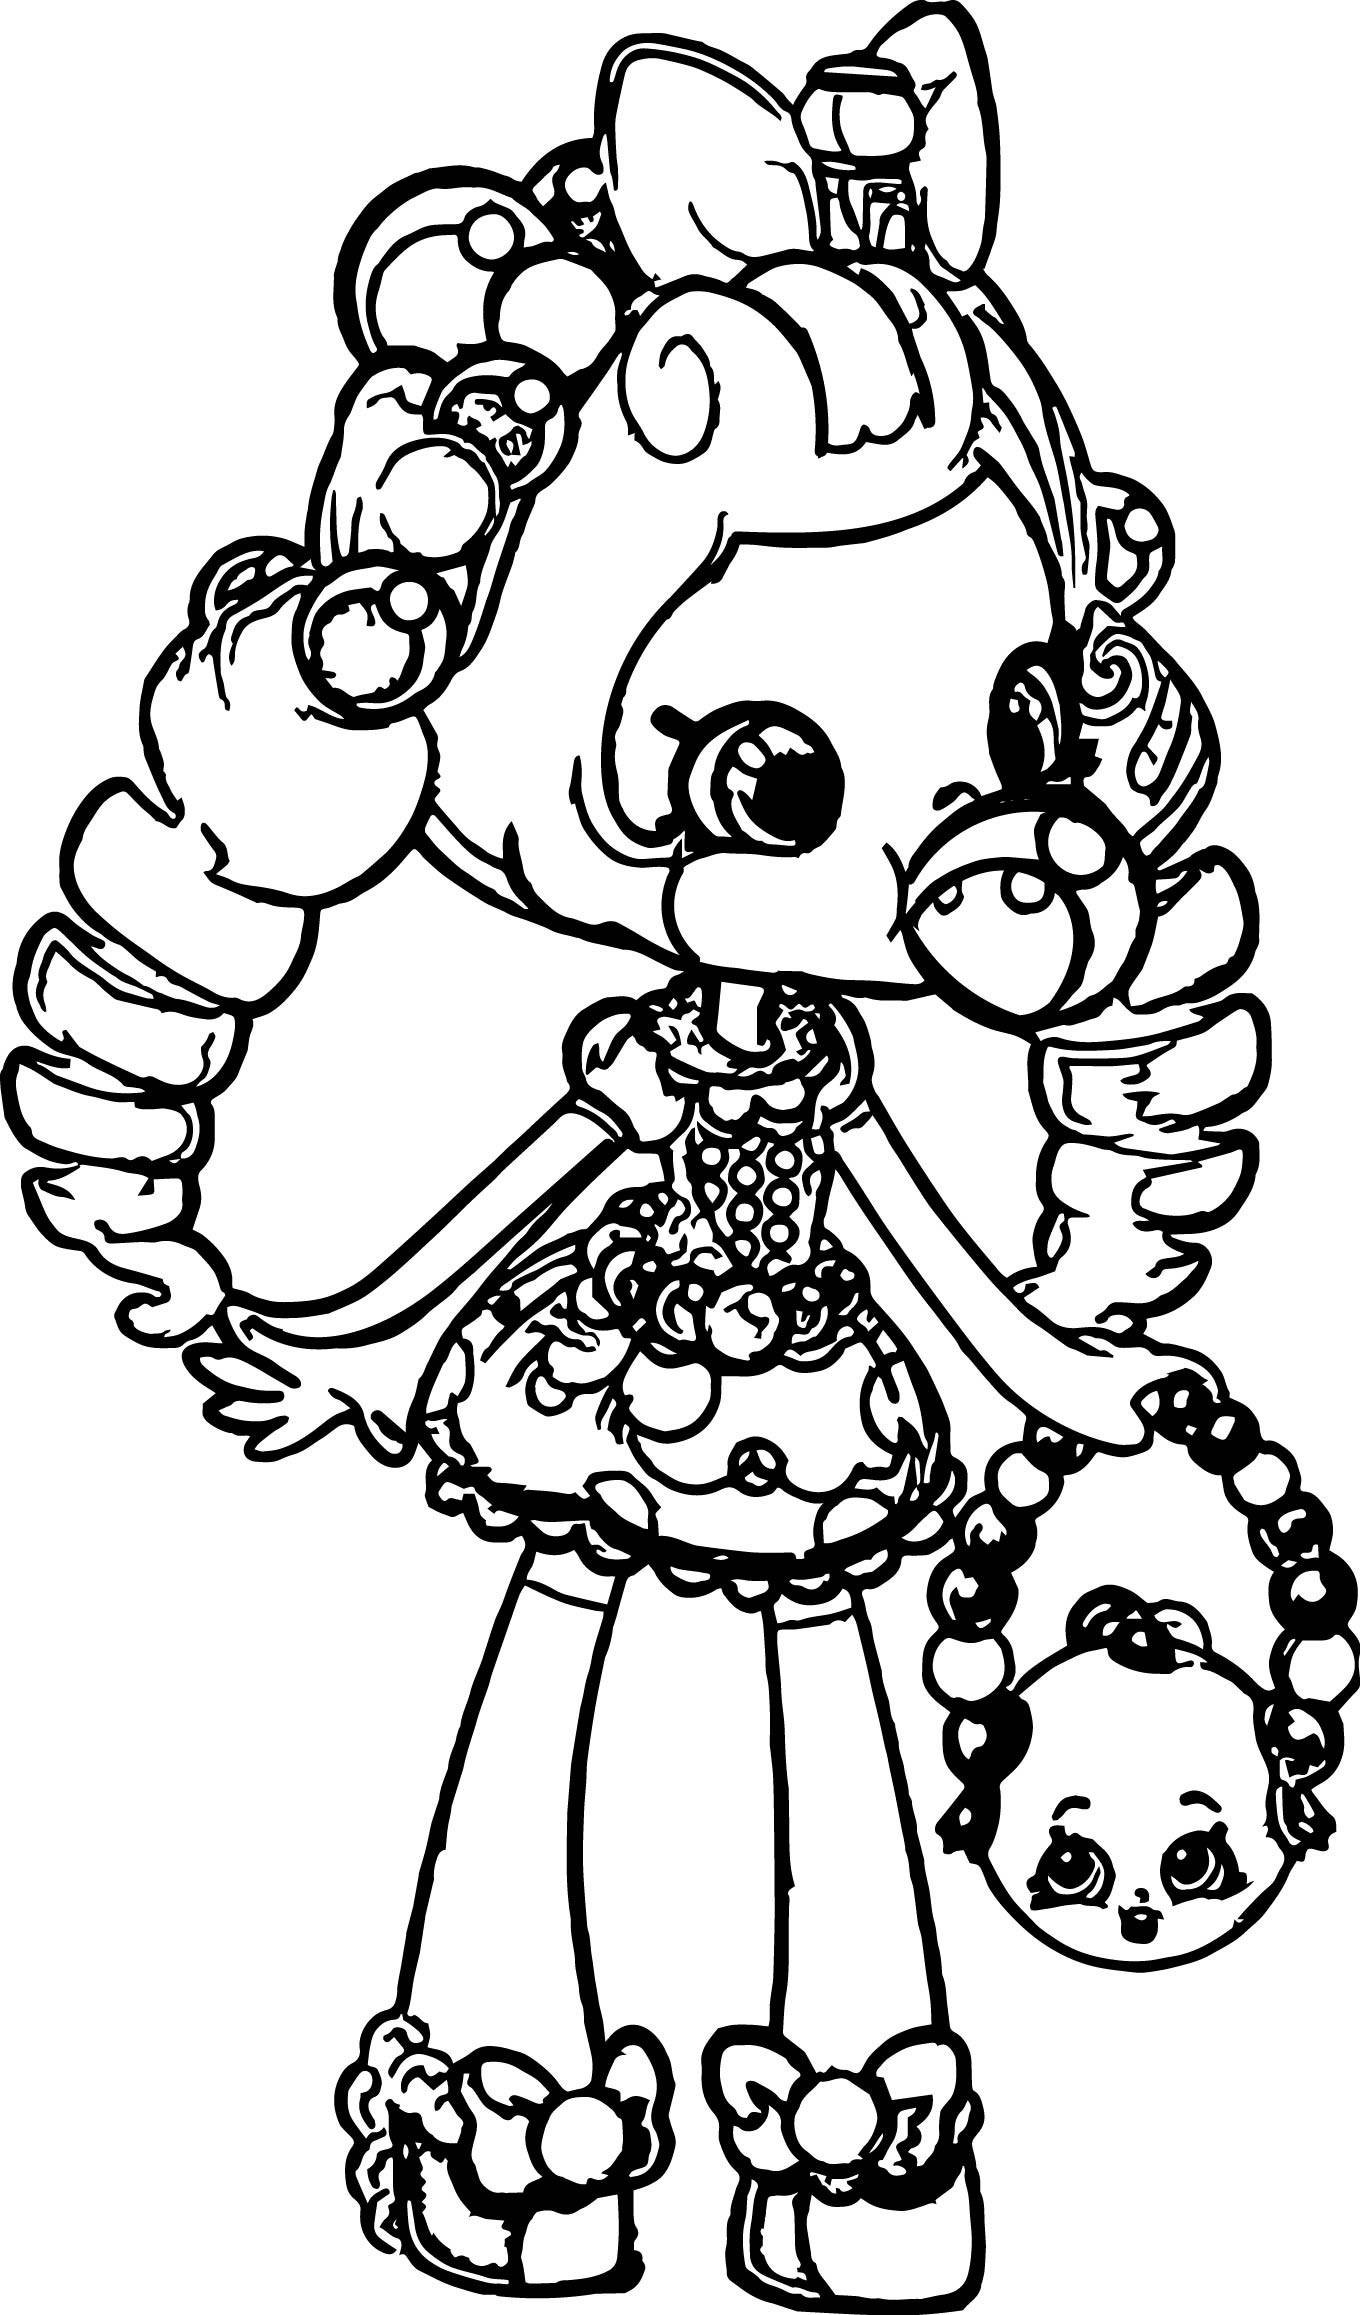 Shopkins Girls Coloring Pages
 Shopkins Balloon Girl Coloring Page